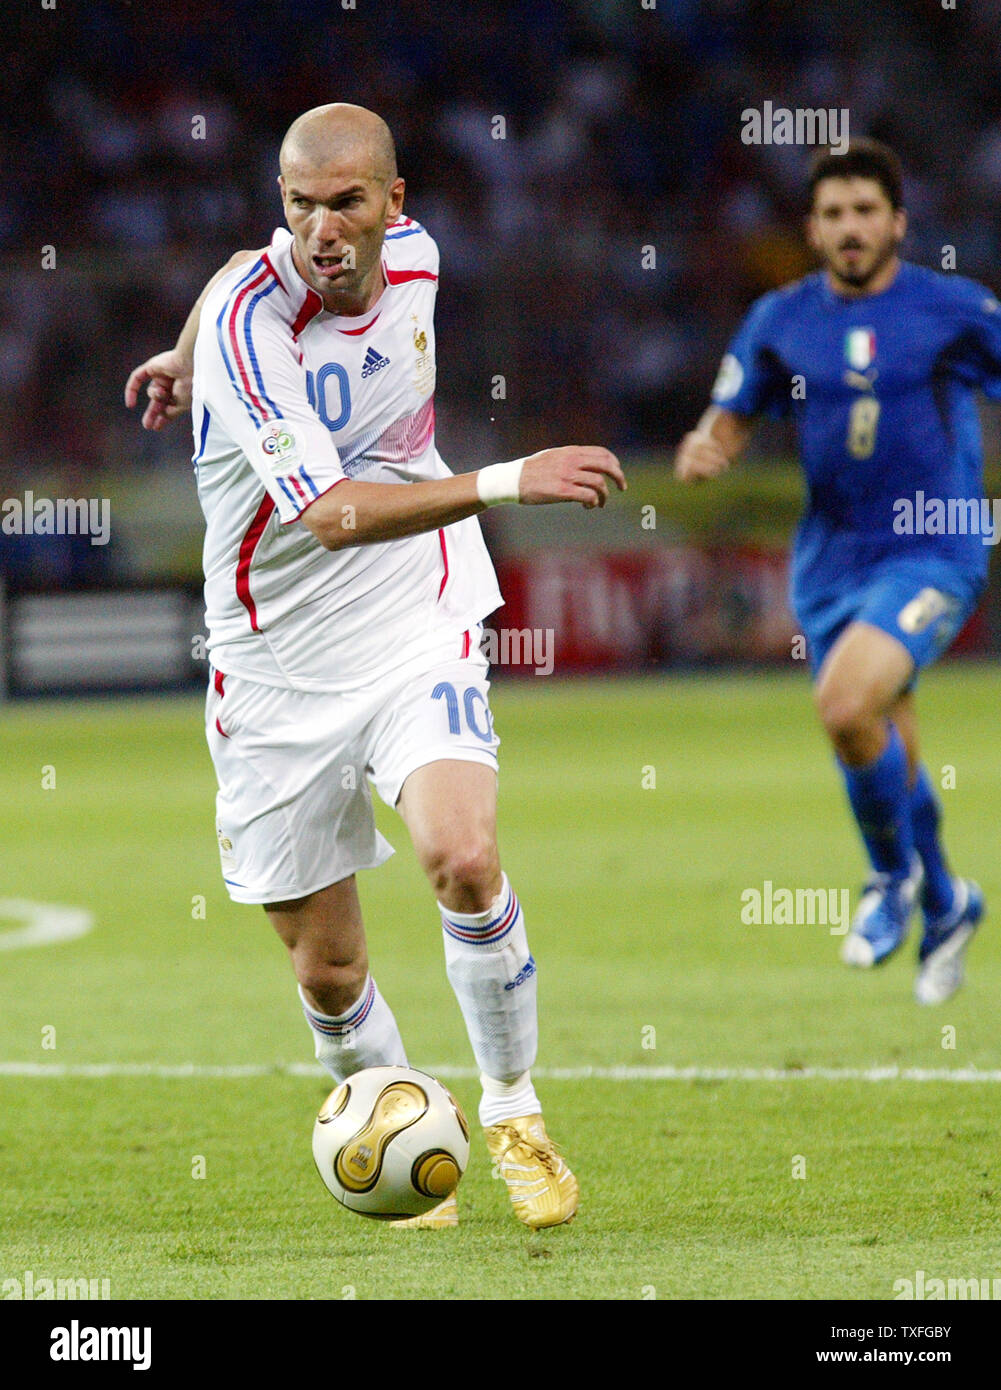 France's Zinedine Zidane dribbles the ball against Italy in the World Cup soccer final in Berlin, Germany on July 9, 2006. Italy is World Champion after defeating France 5-3. (UPI Photo/Arthur Thill) Stock Photo